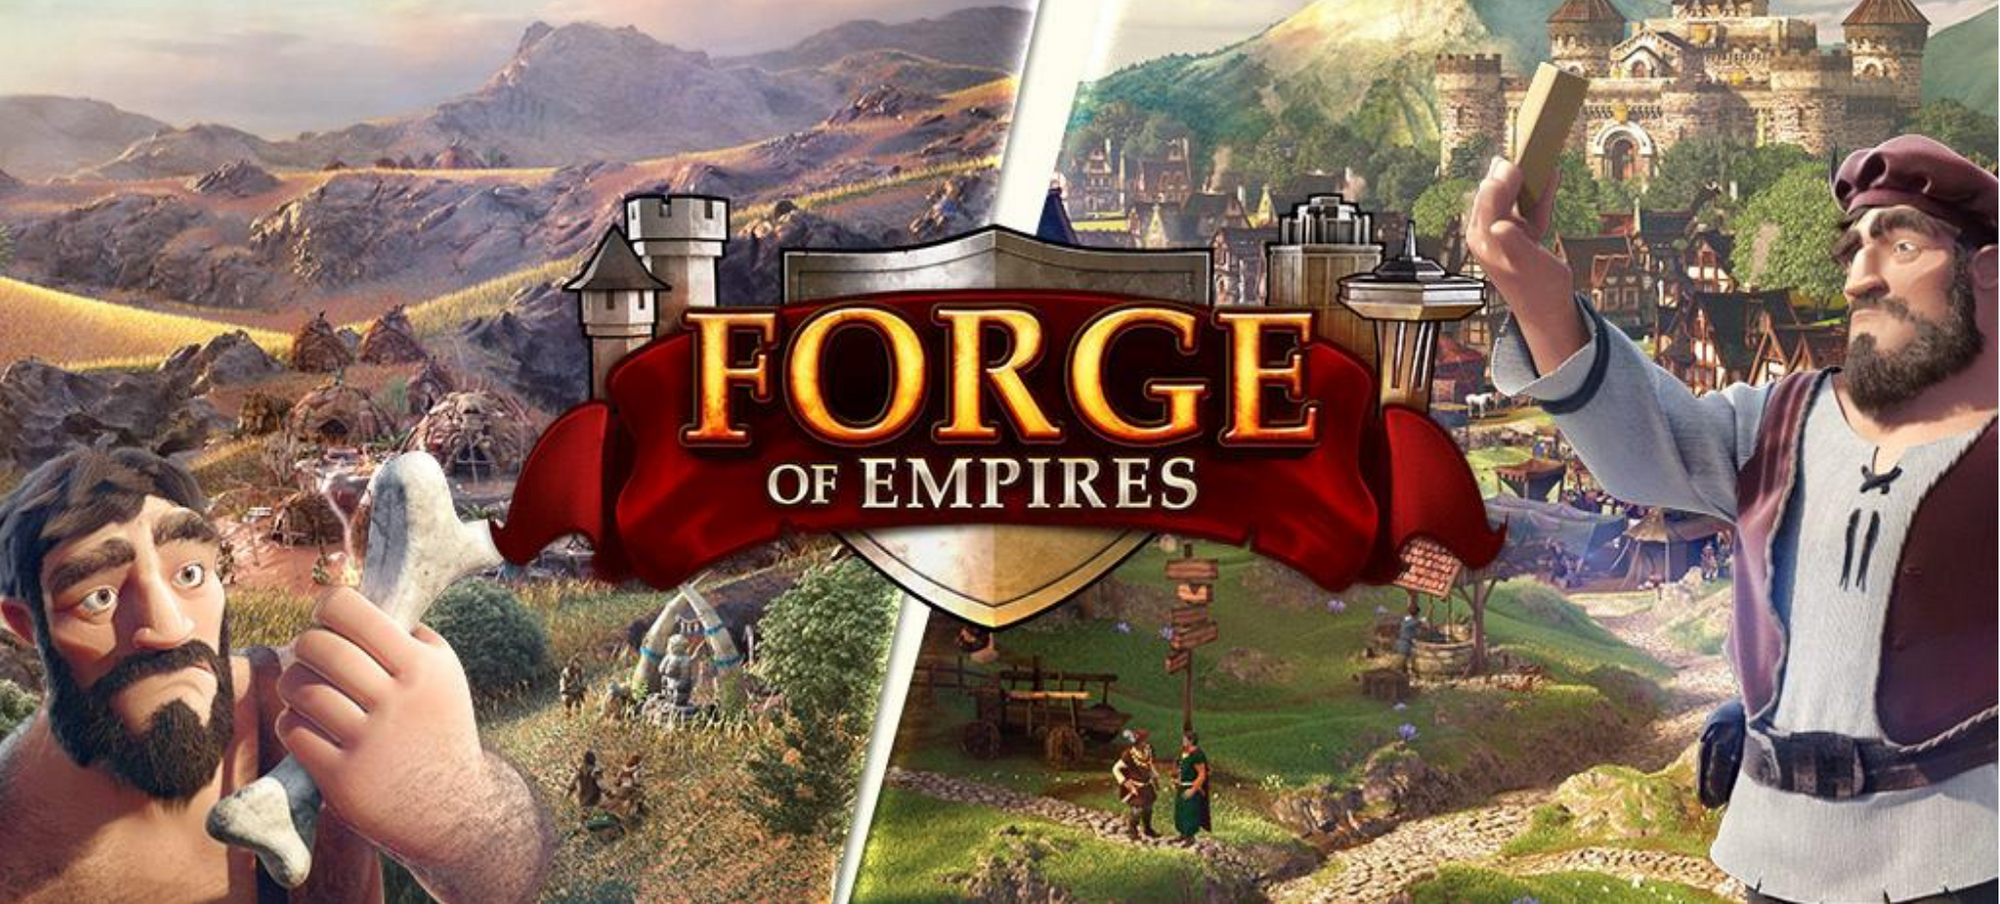 Forge of Empire 1.png